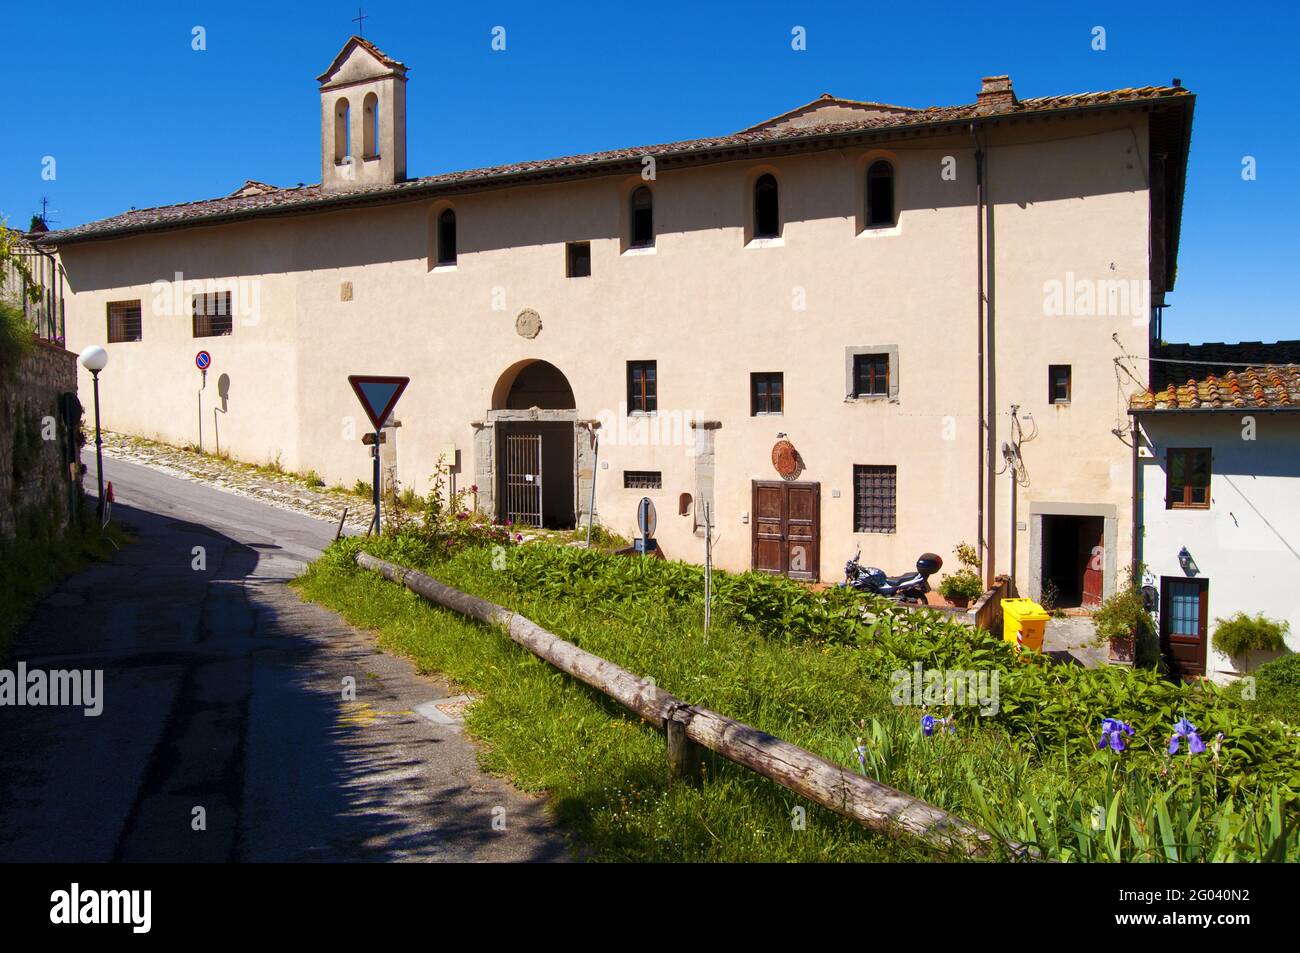 Bagno a Ripoli, Florence, Tuscany, Italy - Spedale del Bigallo, ancient building dating back to 1214. Stock Photo